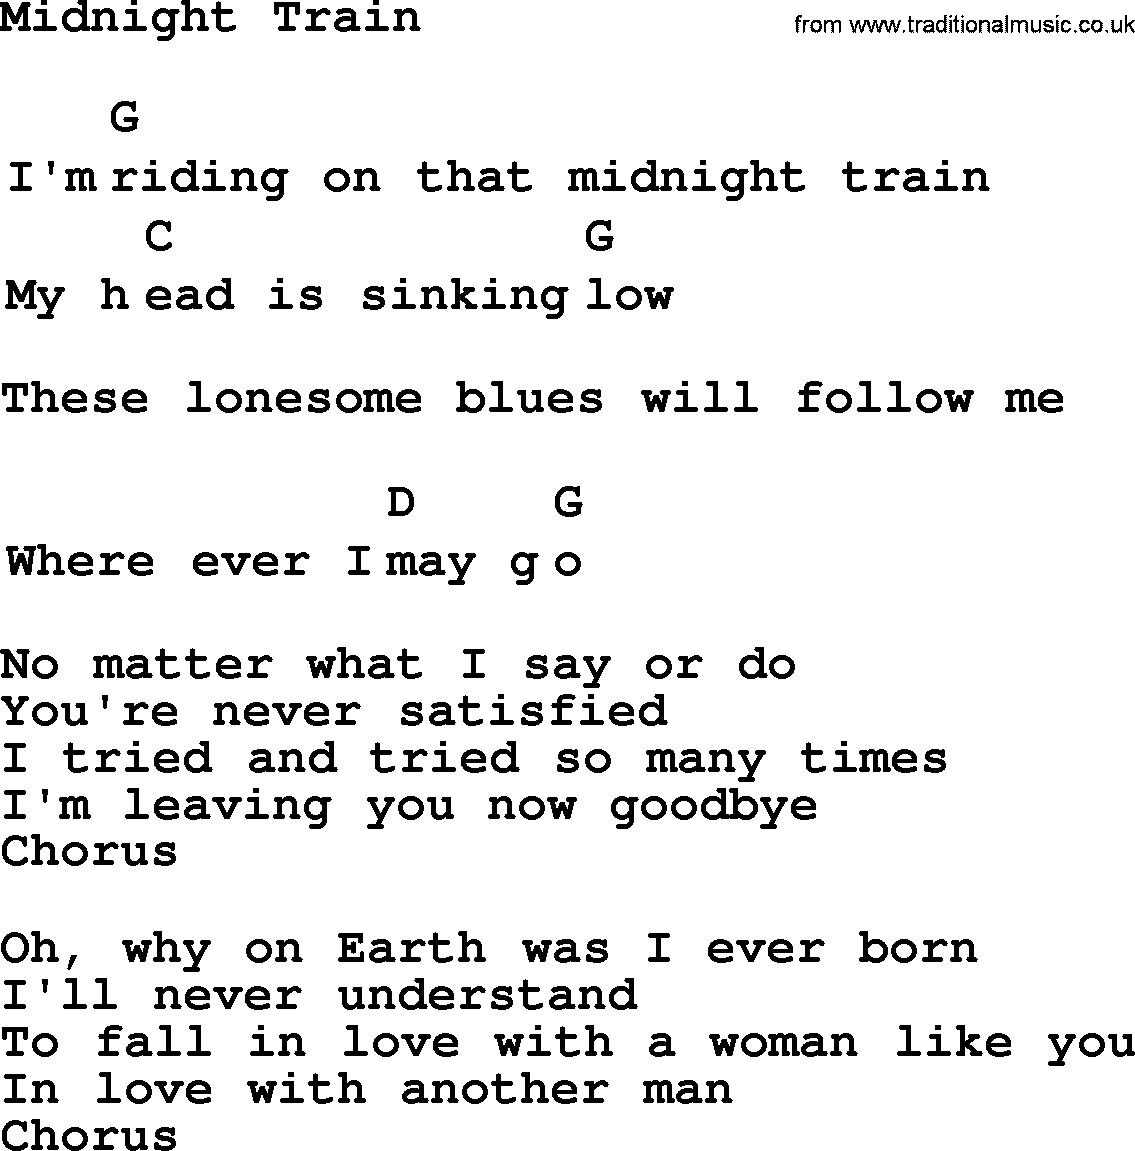 Top 1000 Most Popular Folk and Old-time Songs: Midnight Train, lyrics and chords